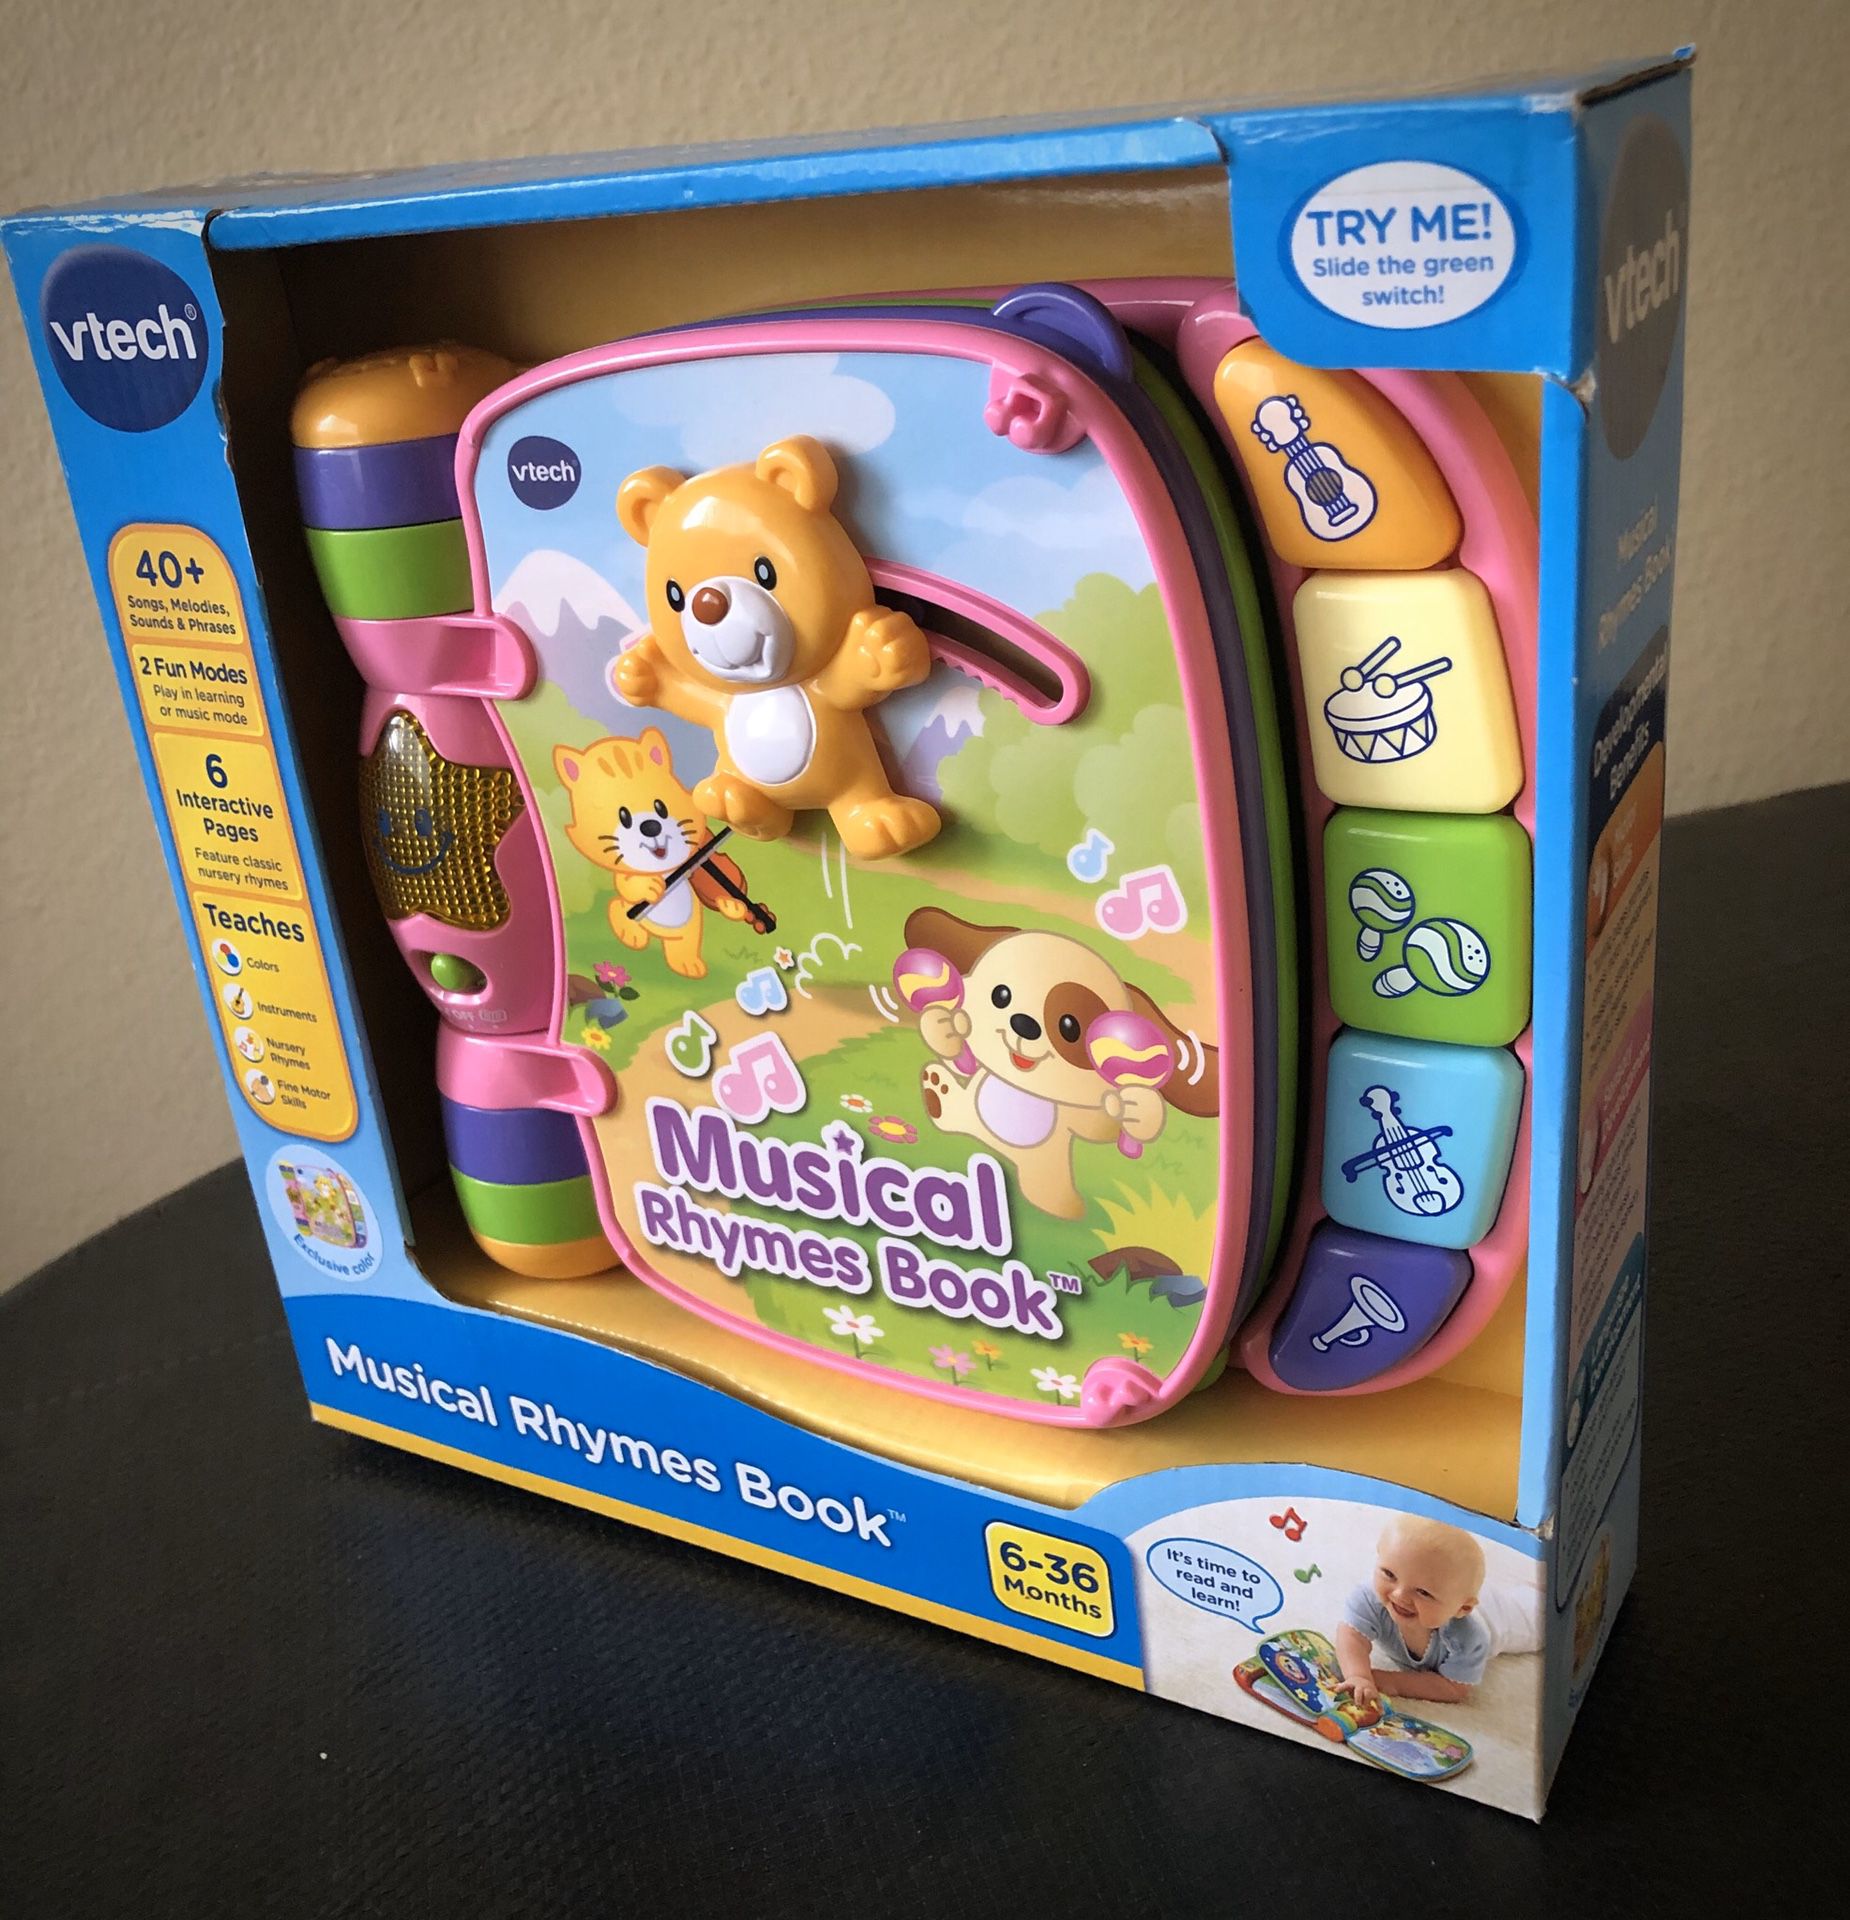 Baby Toy - VTech Musical Rhymes Book, Pink